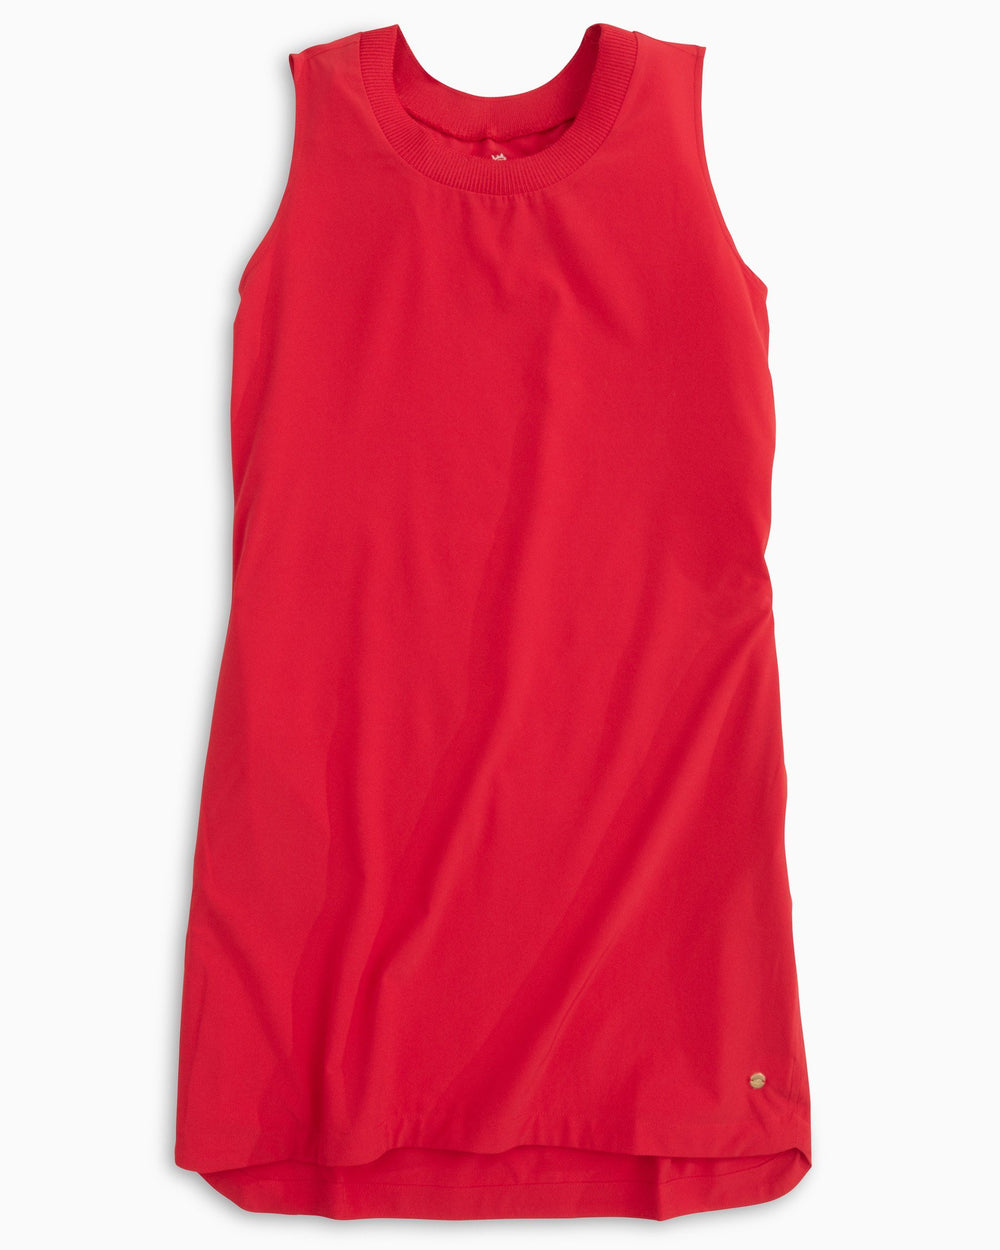 The flat view of the Women's Red Gameday Dress by Southern Tide - Varsity Red